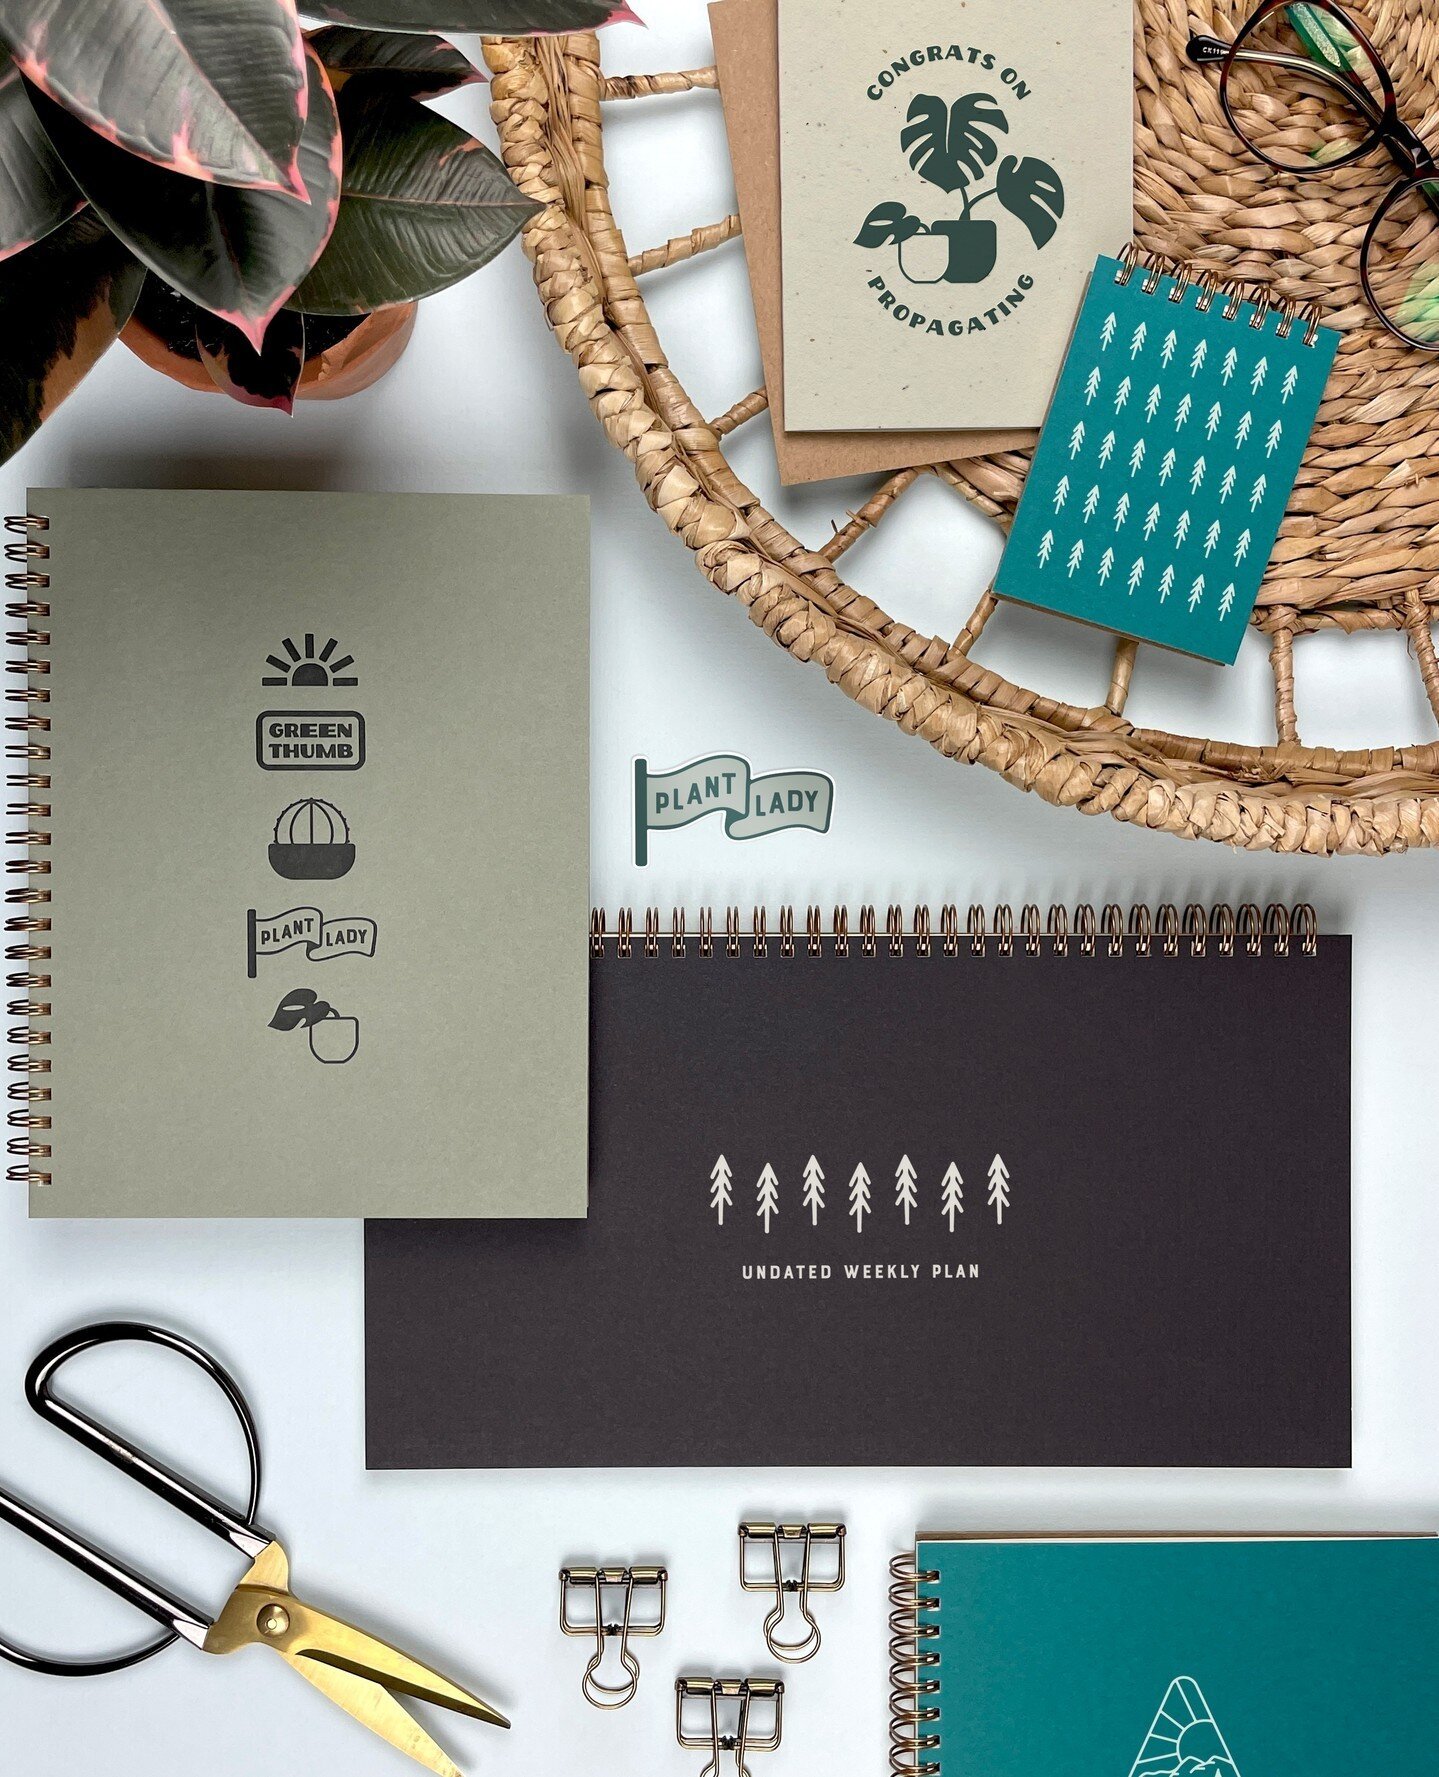 🗒️ @ruffhouseprintshop is a woman owned and run letterpress print shop in downtown Lawrence, Kansas. Each product created expresses their love of the outdoors and adventure, small-town values and positivity. #womenowned #smallbusiness #smallbusiness